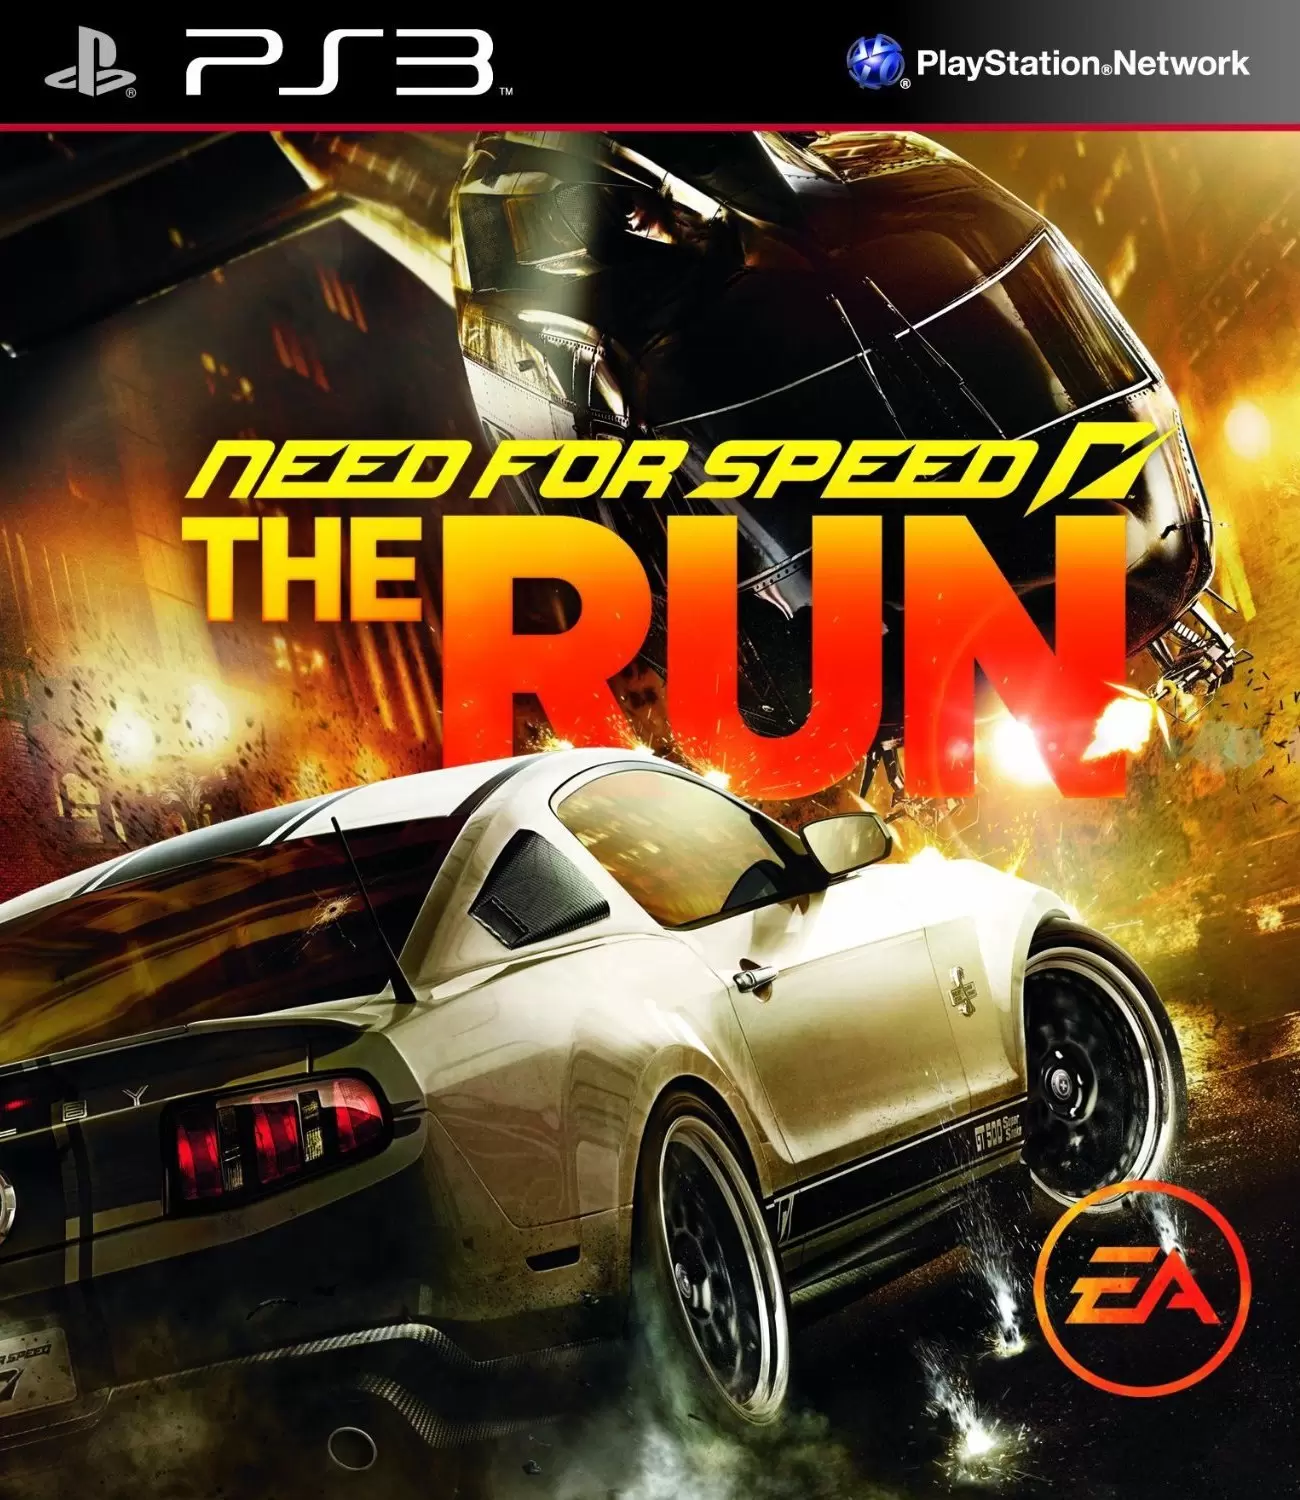 PS3 Games - Need for Speed: The Run